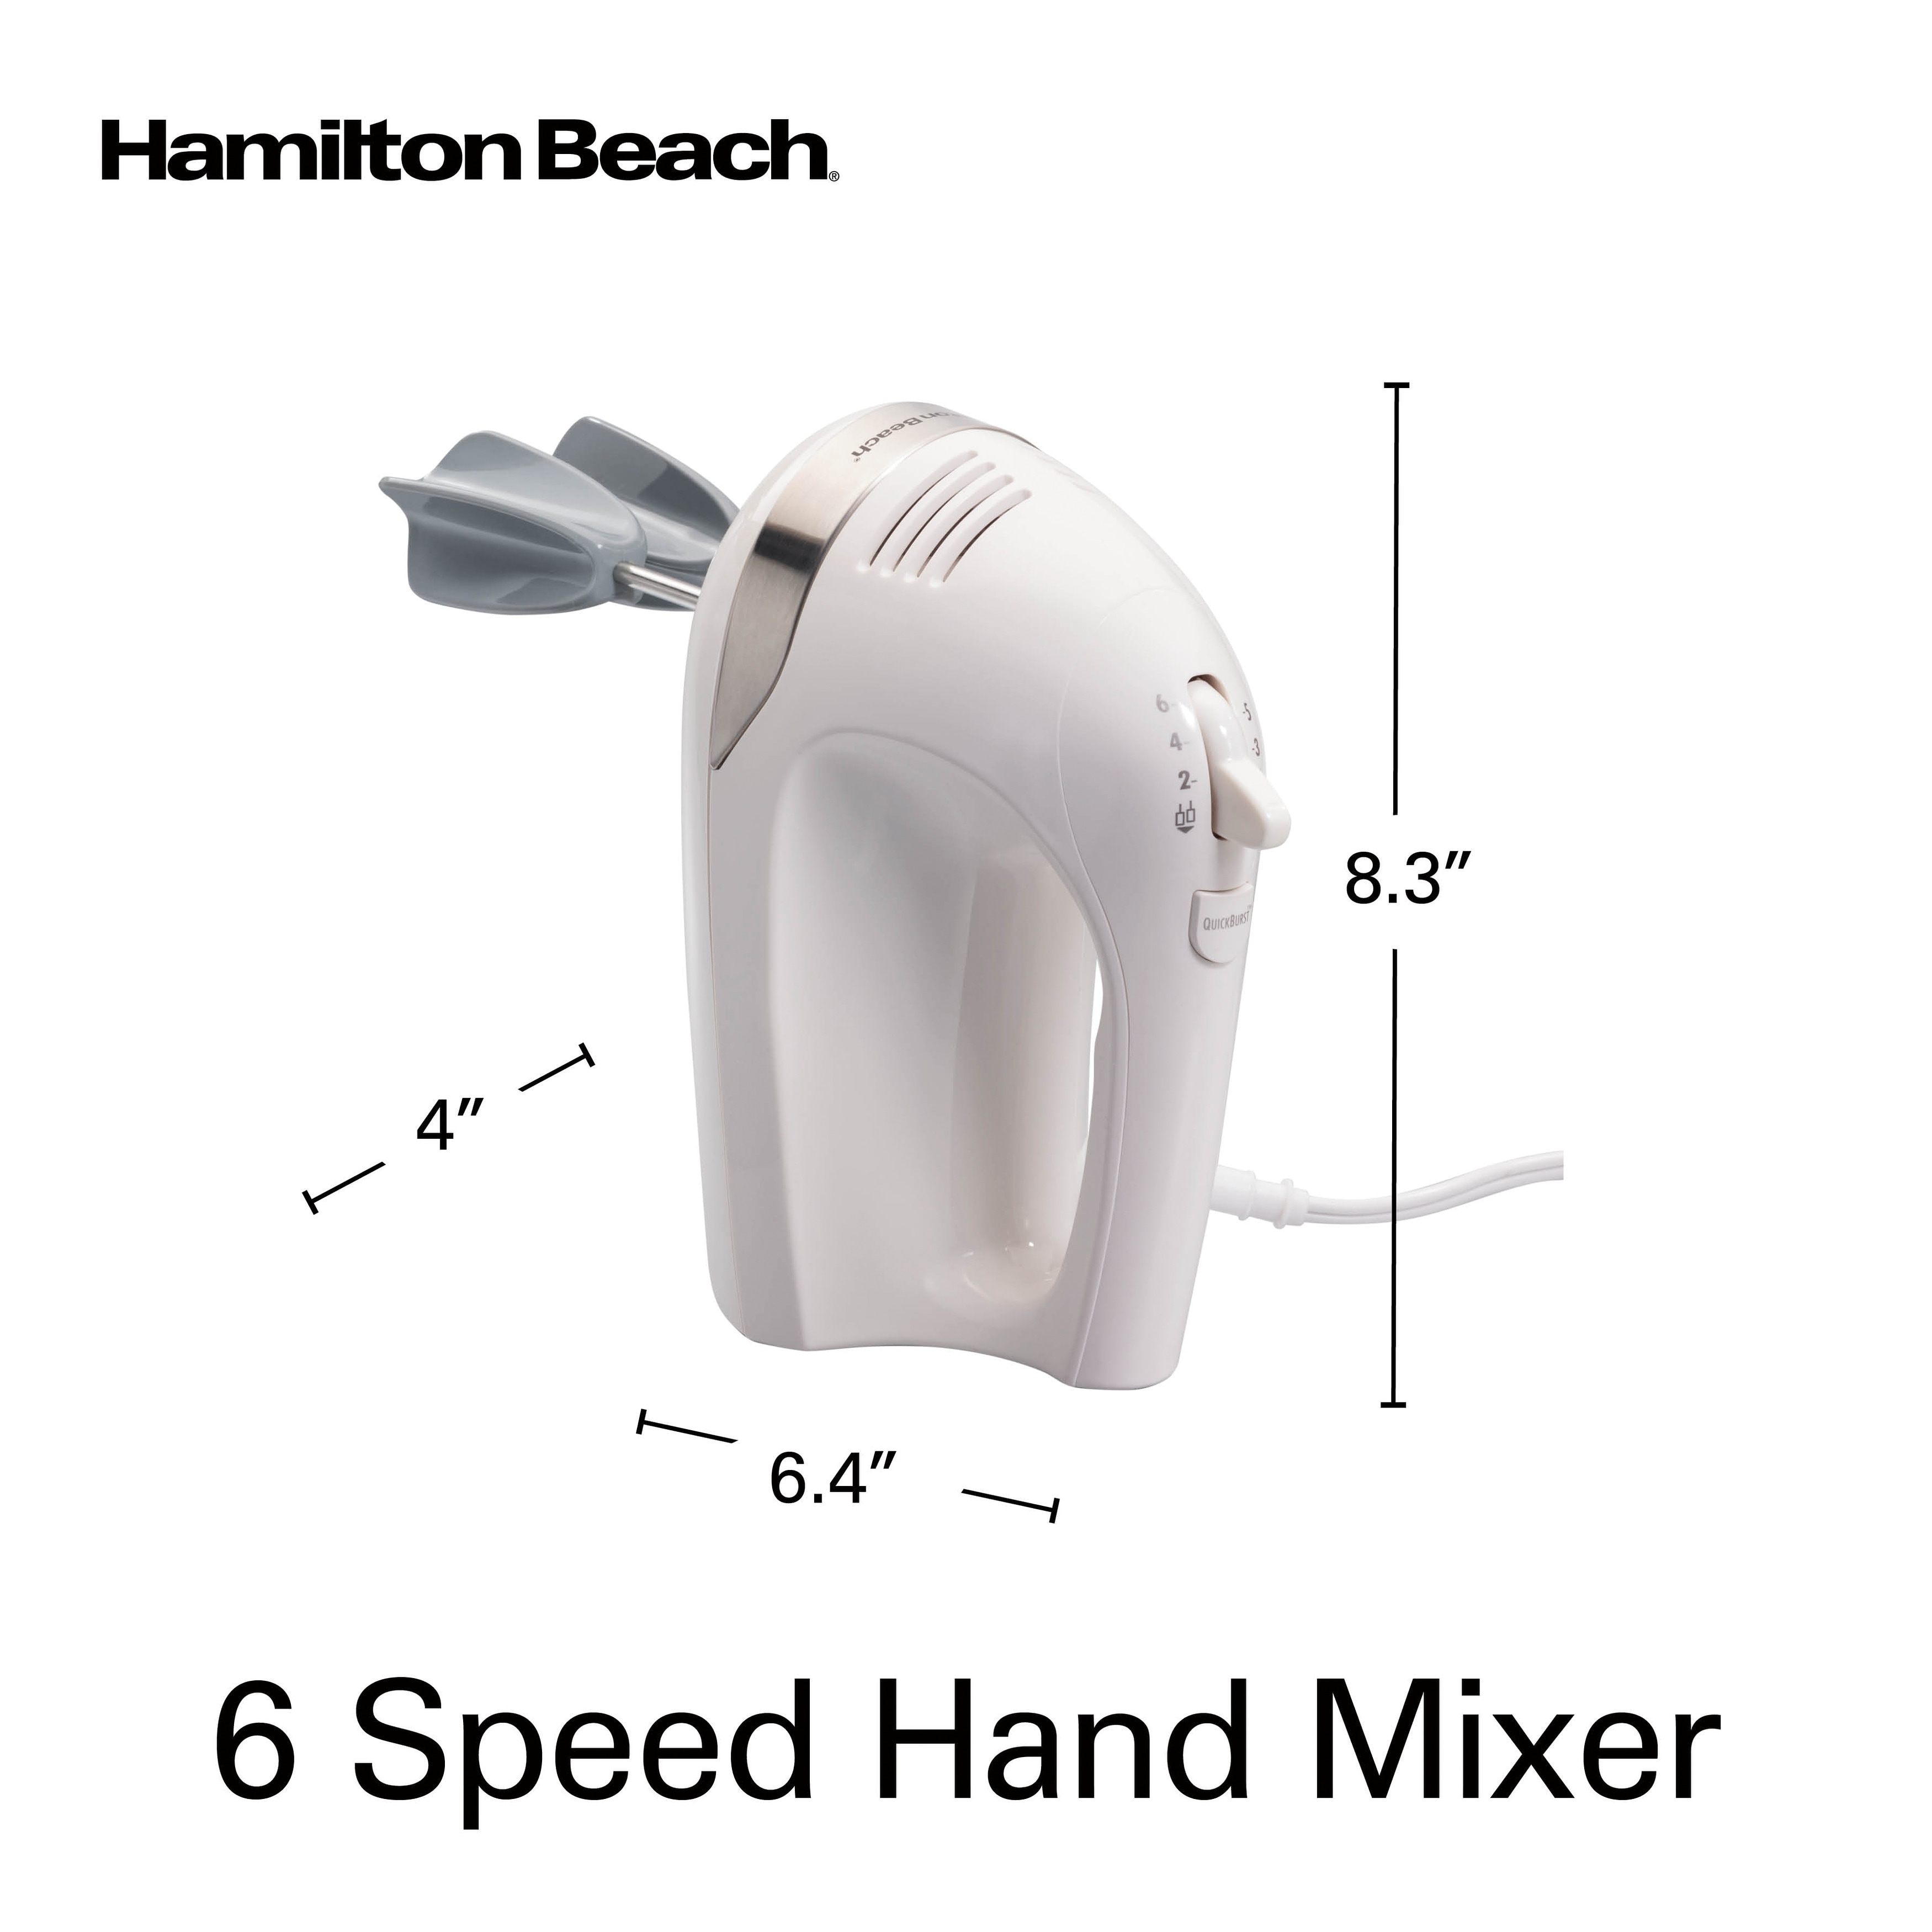 https://ak1.ostkcdn.com/images/products/is/images/direct/d727e58b348dfc43e4d1dc98b1771ffe6b149d25/Hamilton-Beach-6-Speed-Hand-Mixer-with-Easy-Clean-Beaters.jpg